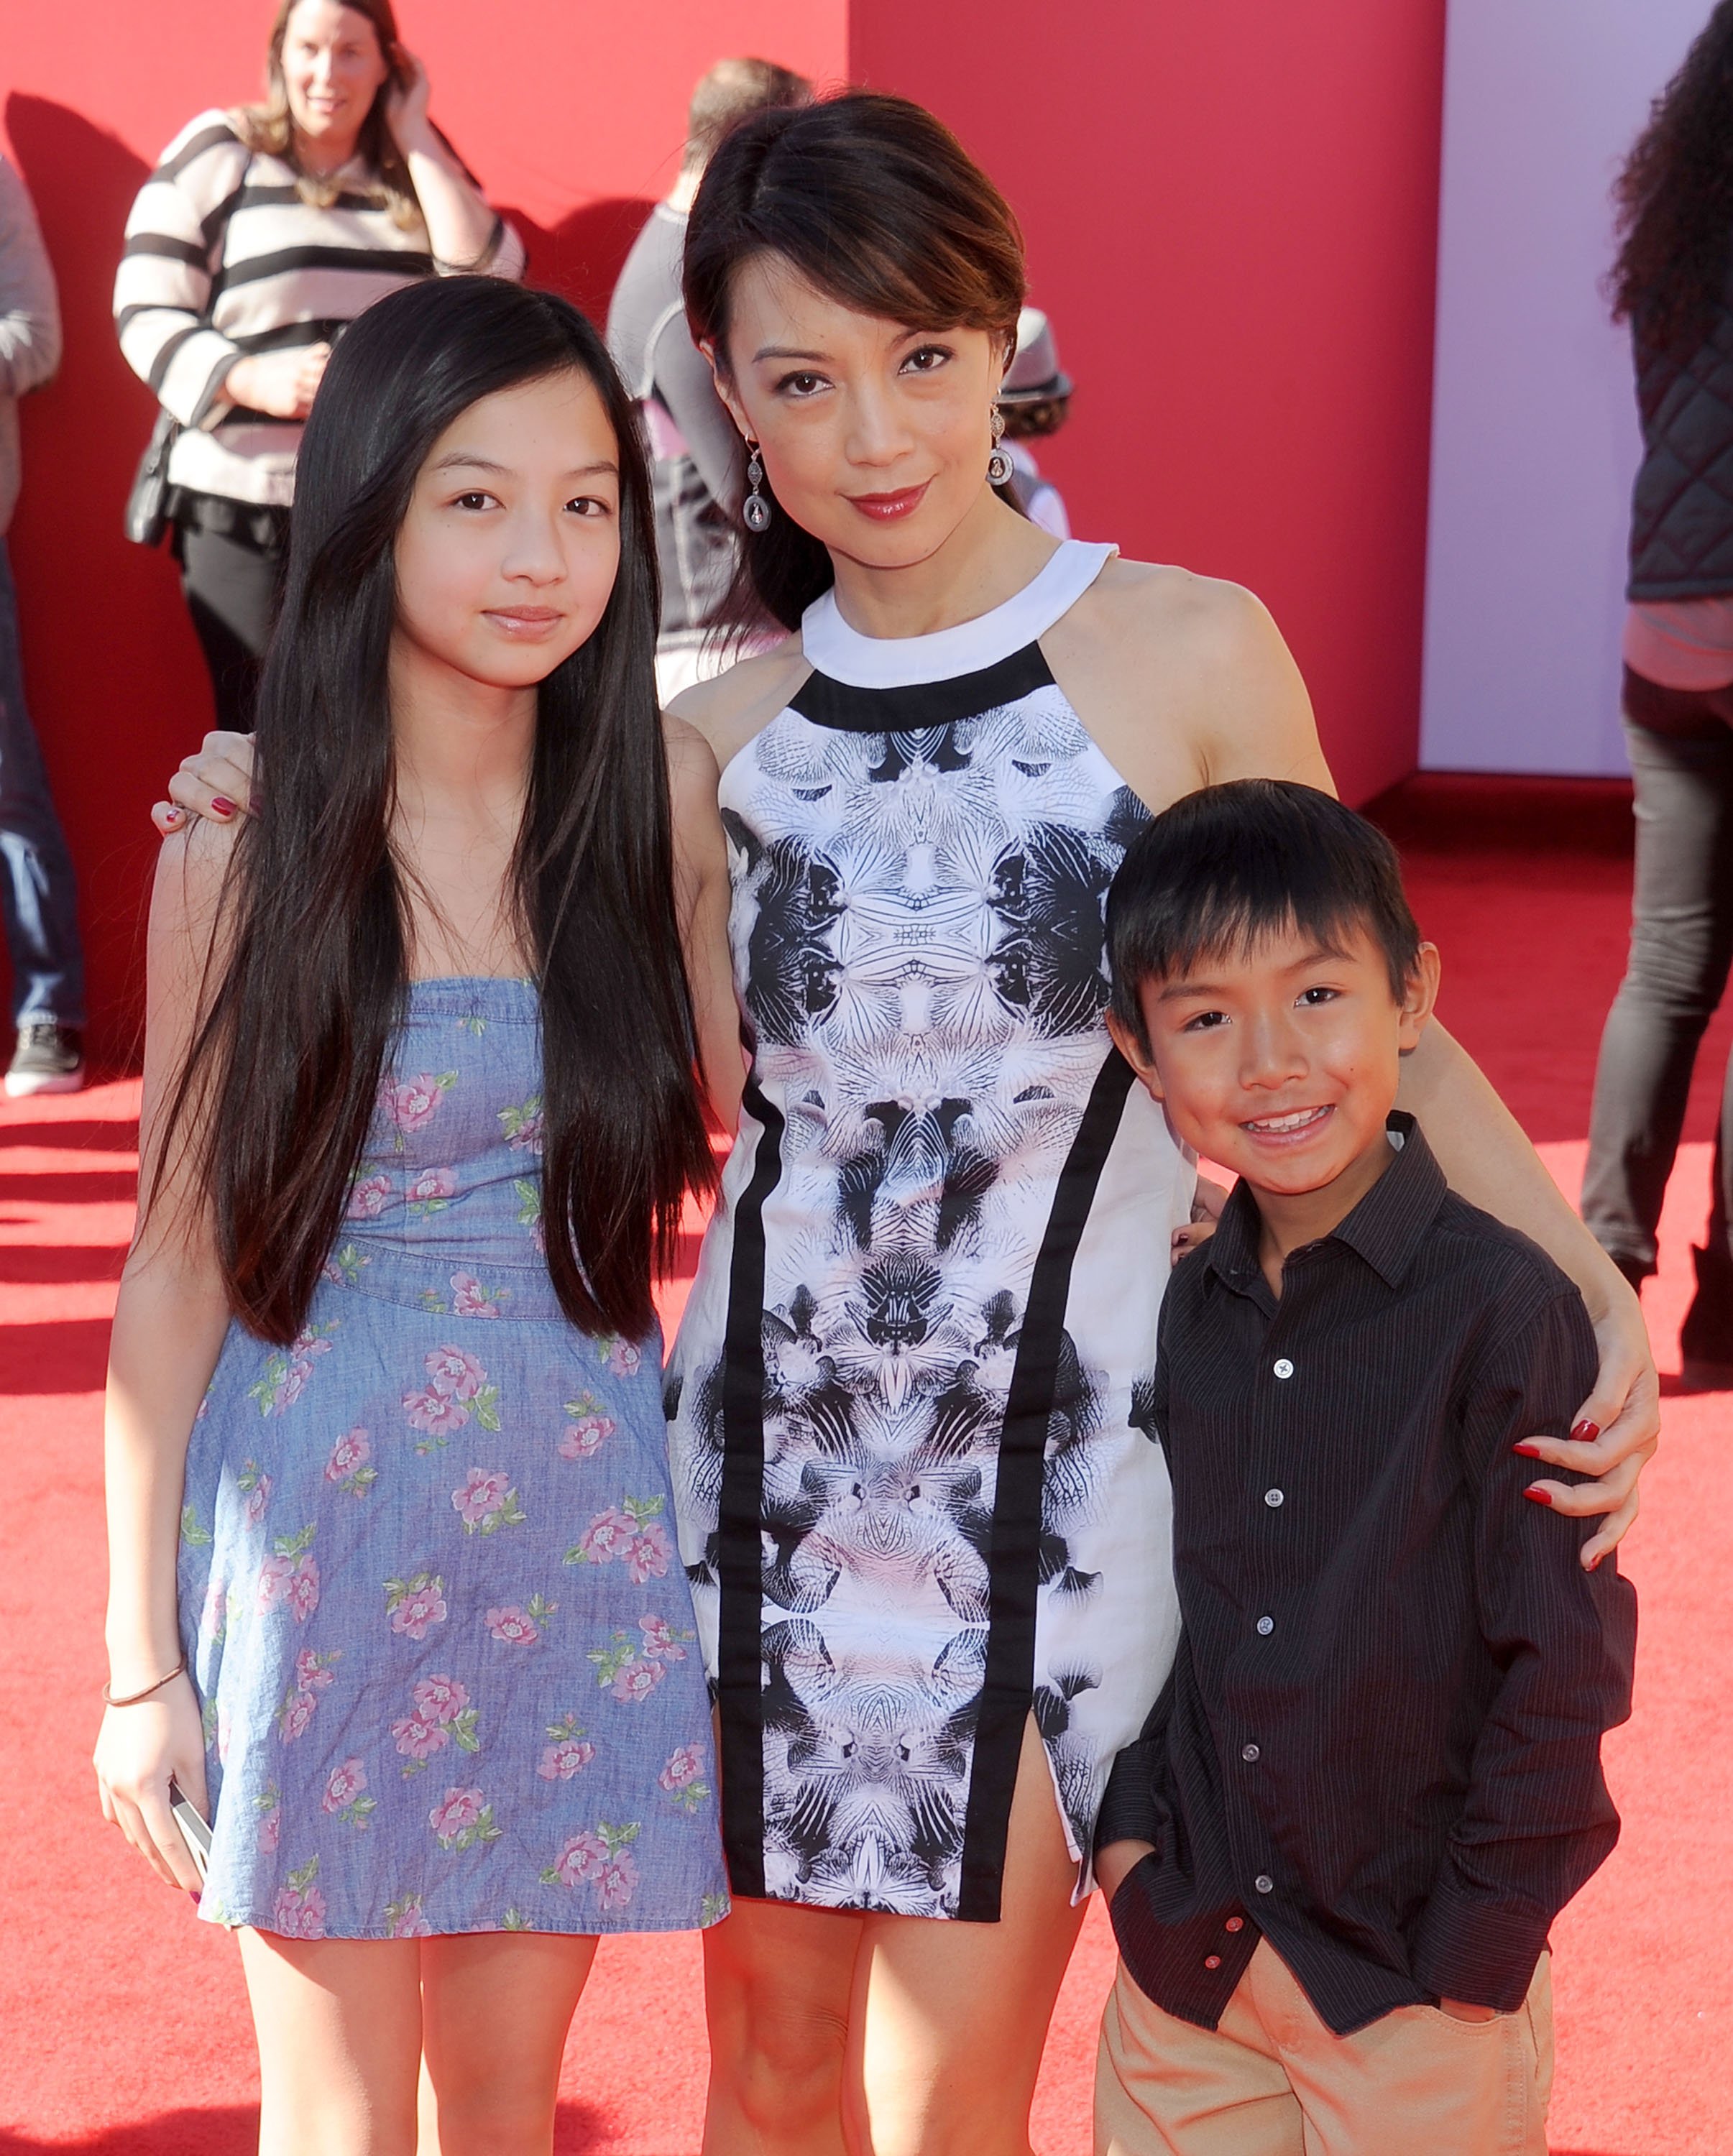 Michaela Zee, Ming-Na Wen, and Cooper Dominic Zee at the Los Angeles premiere of "The Lego Movie" on February 1, 2014, in California | Source: Getty Images